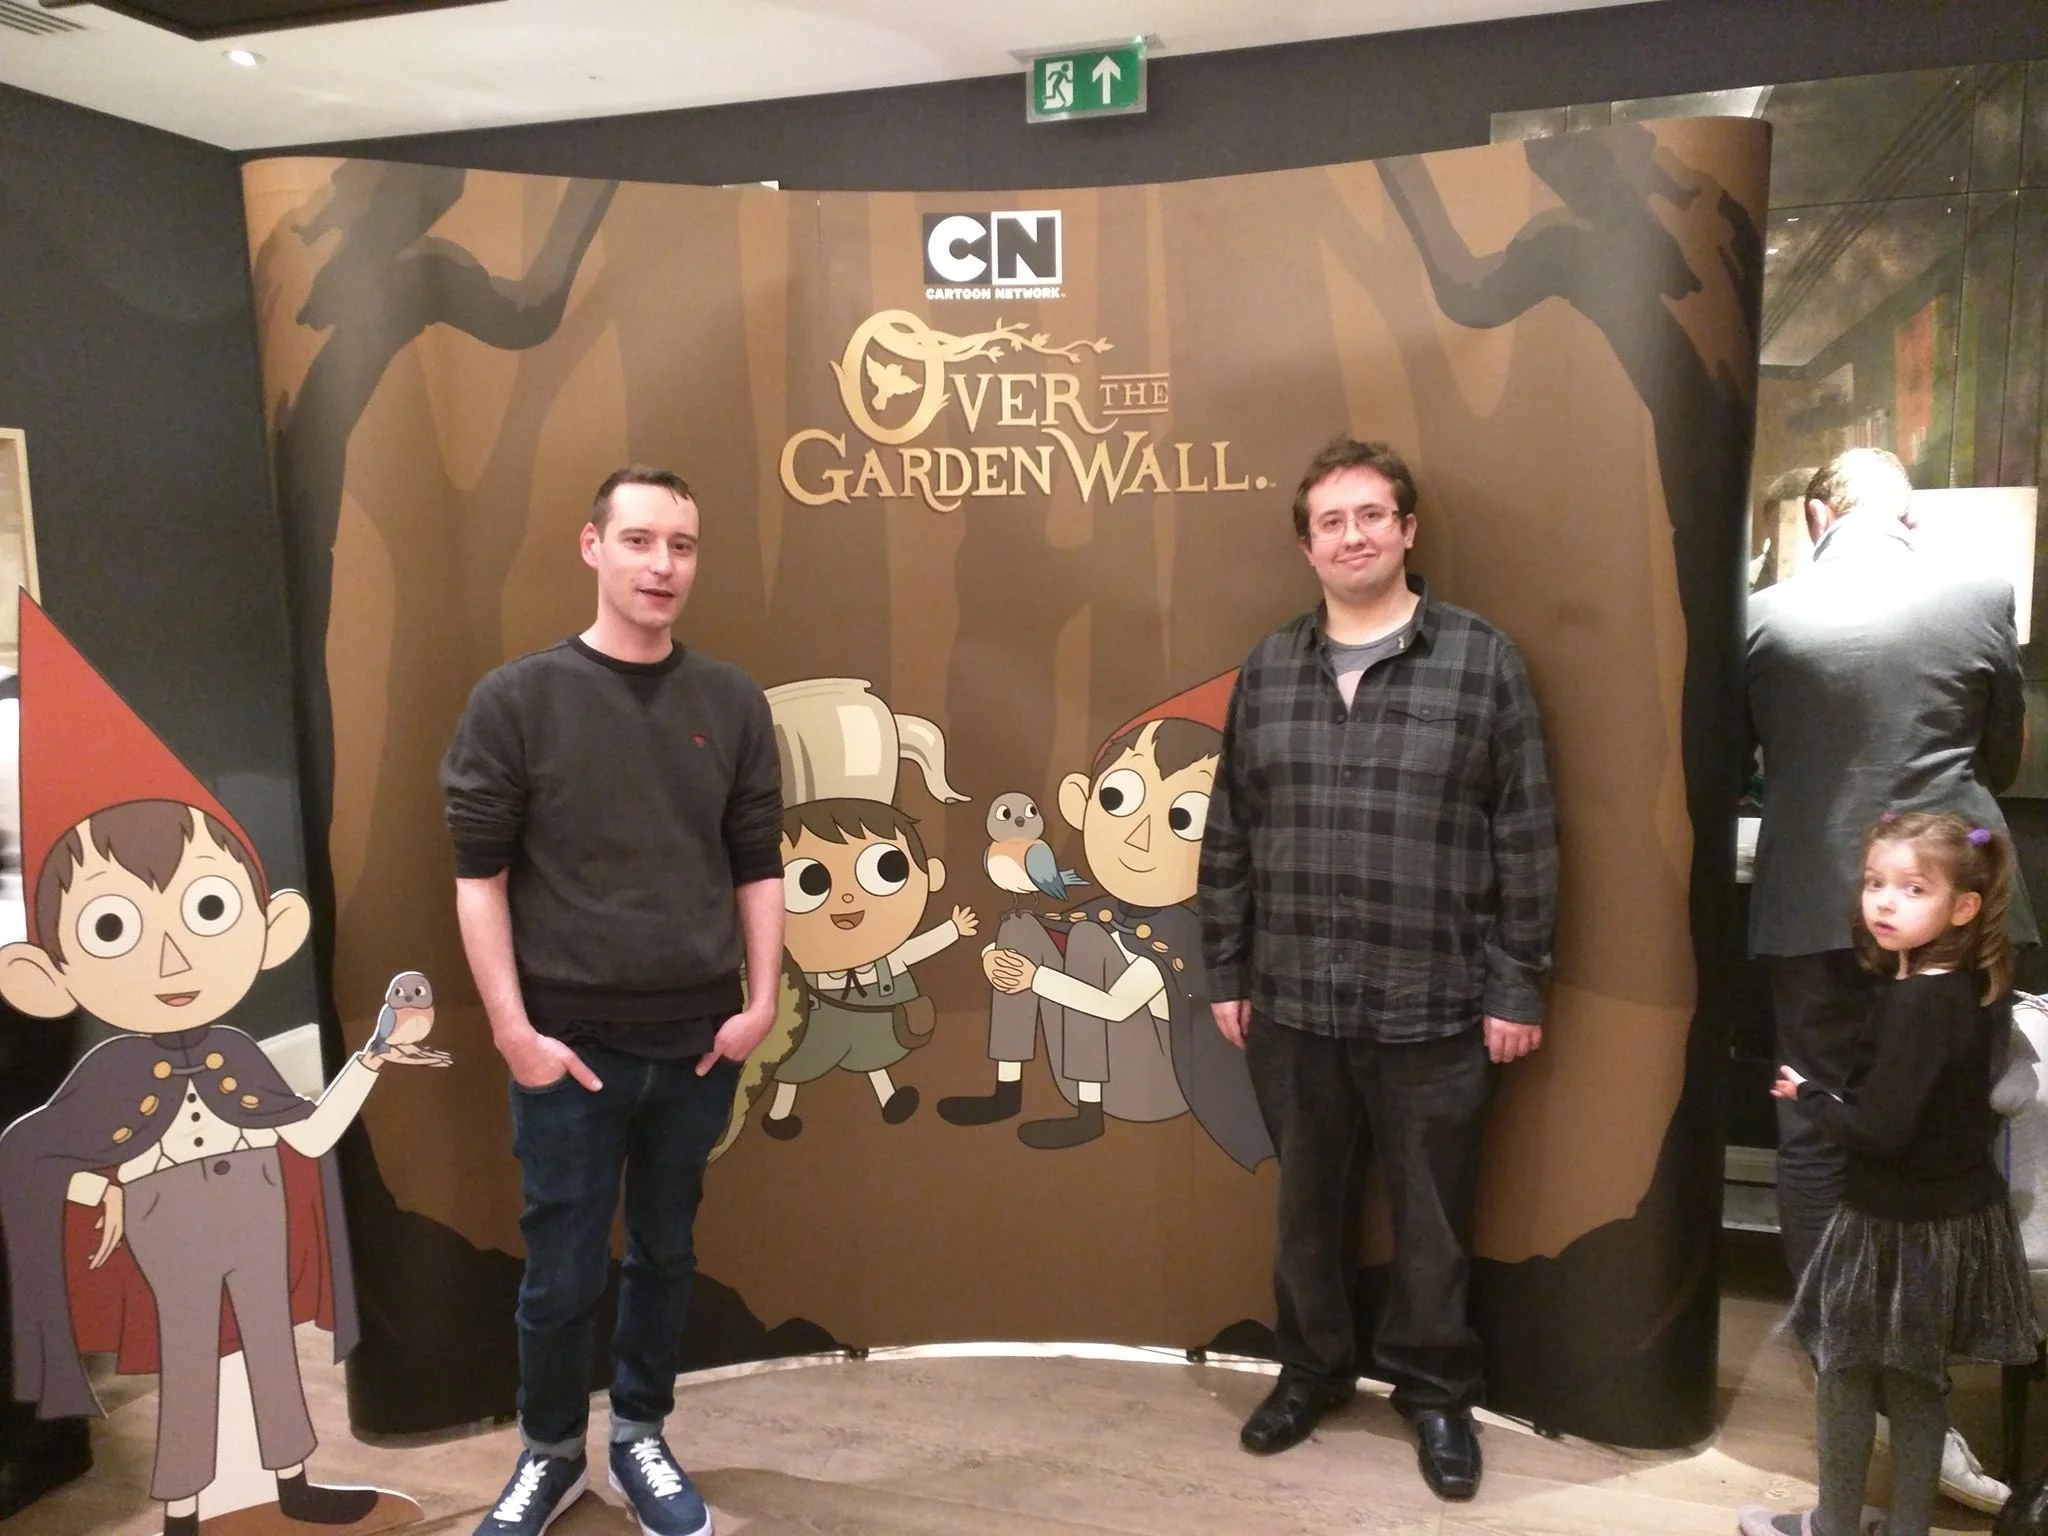 Over The Garden Wall. Im on the right